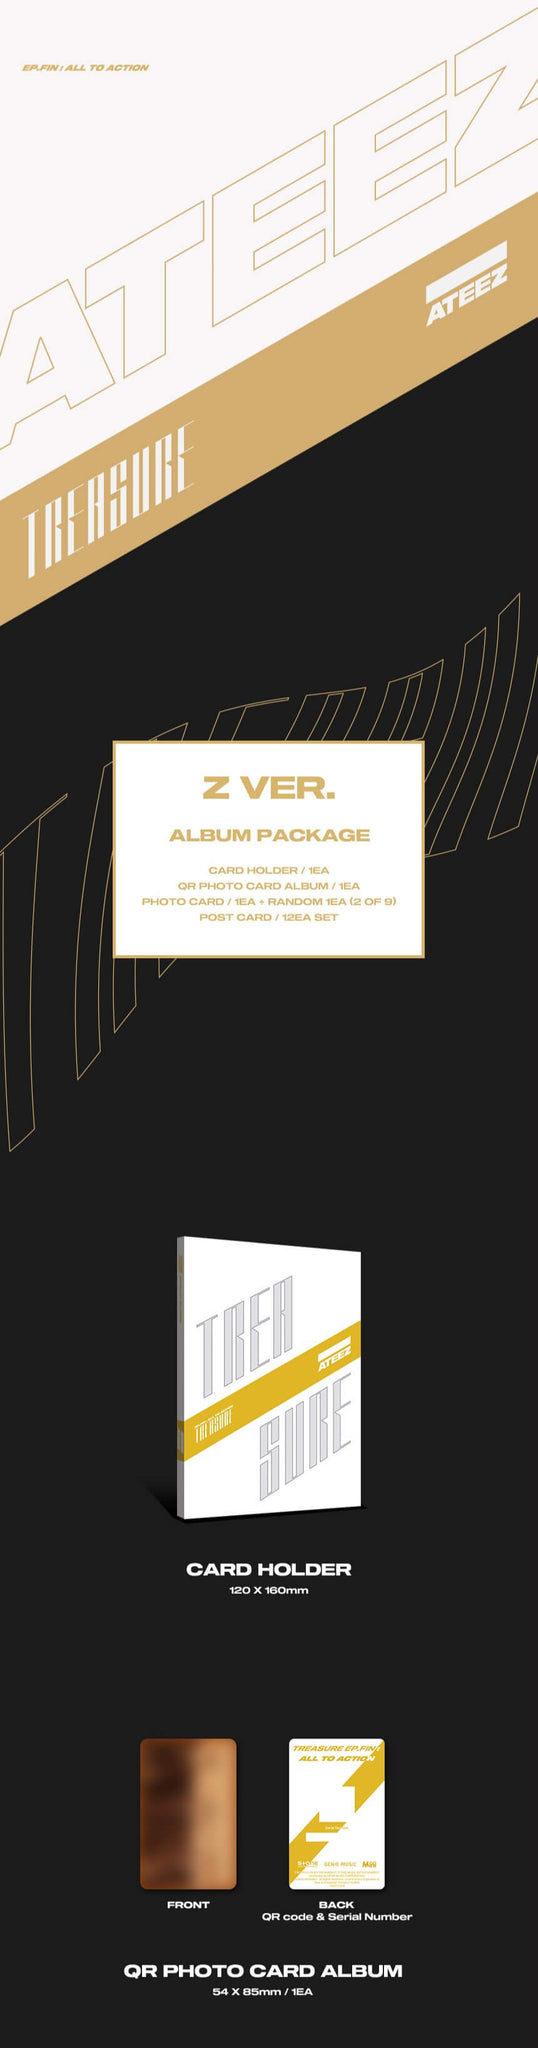 ATEEZ TREASURE EP.FIN All To Action Platform Version - Z Version Inclusions Card Holder